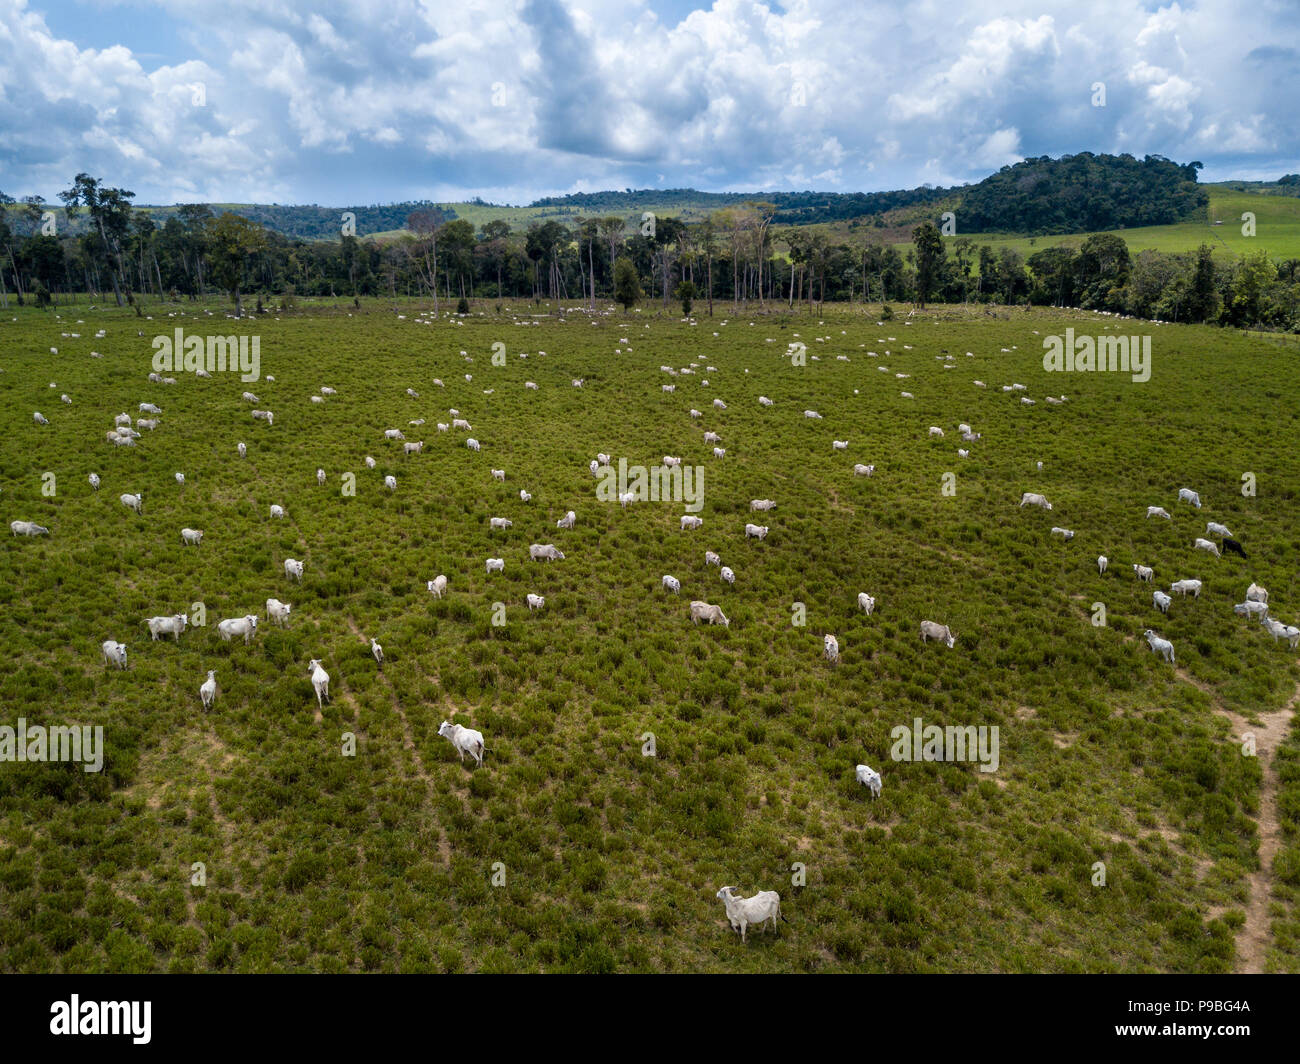 Pará, Brazil. Aerial view of cattle grazing in deforested green area of Amazon on a sunny summer day. Stock Photo